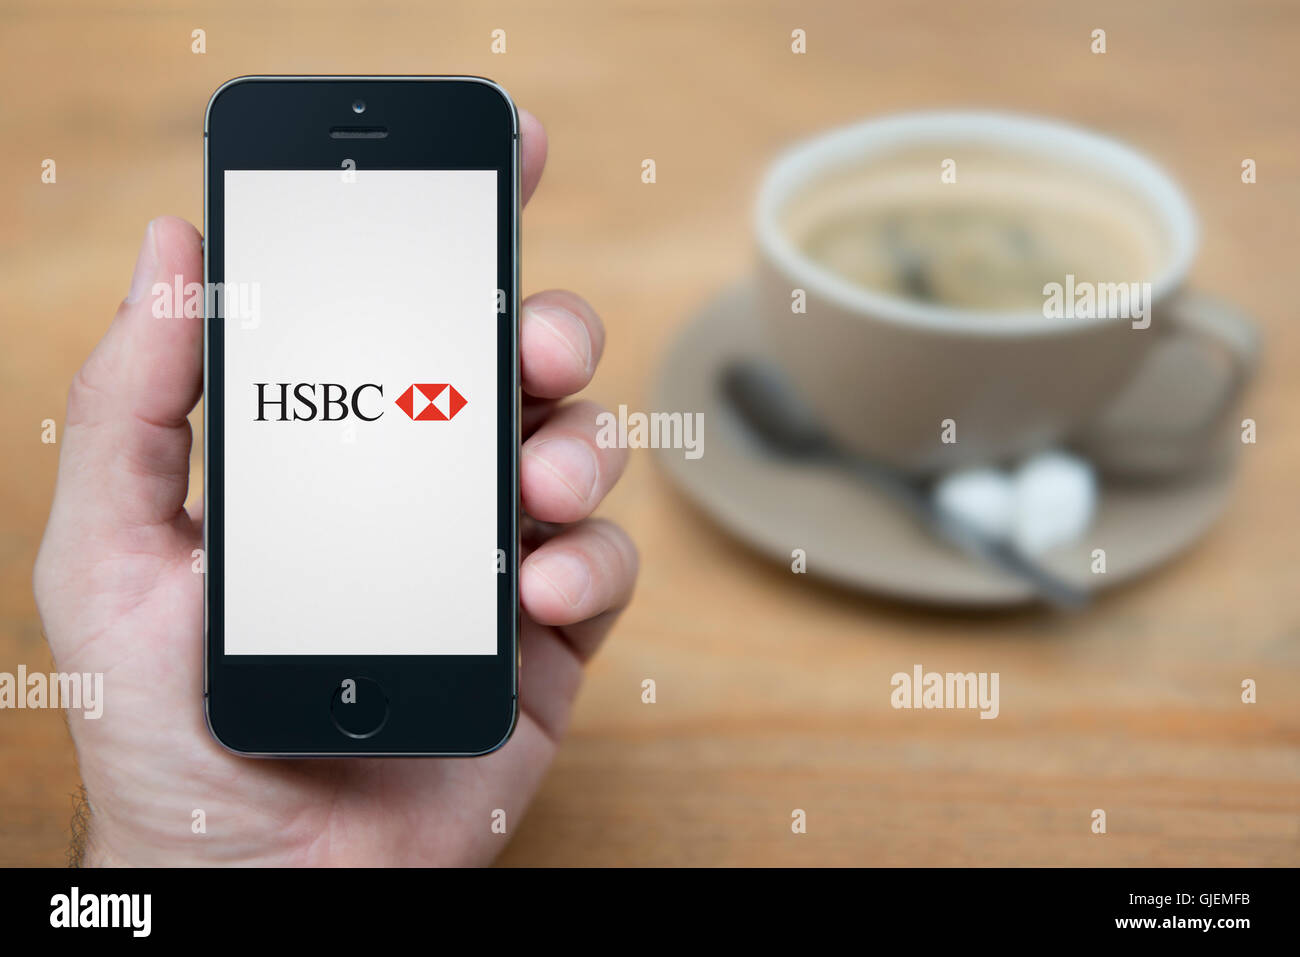 A man looks at his iPhone which displays the HSBC bank logo, while sat with a cup of coffee (Editorial use only). Stock Photo